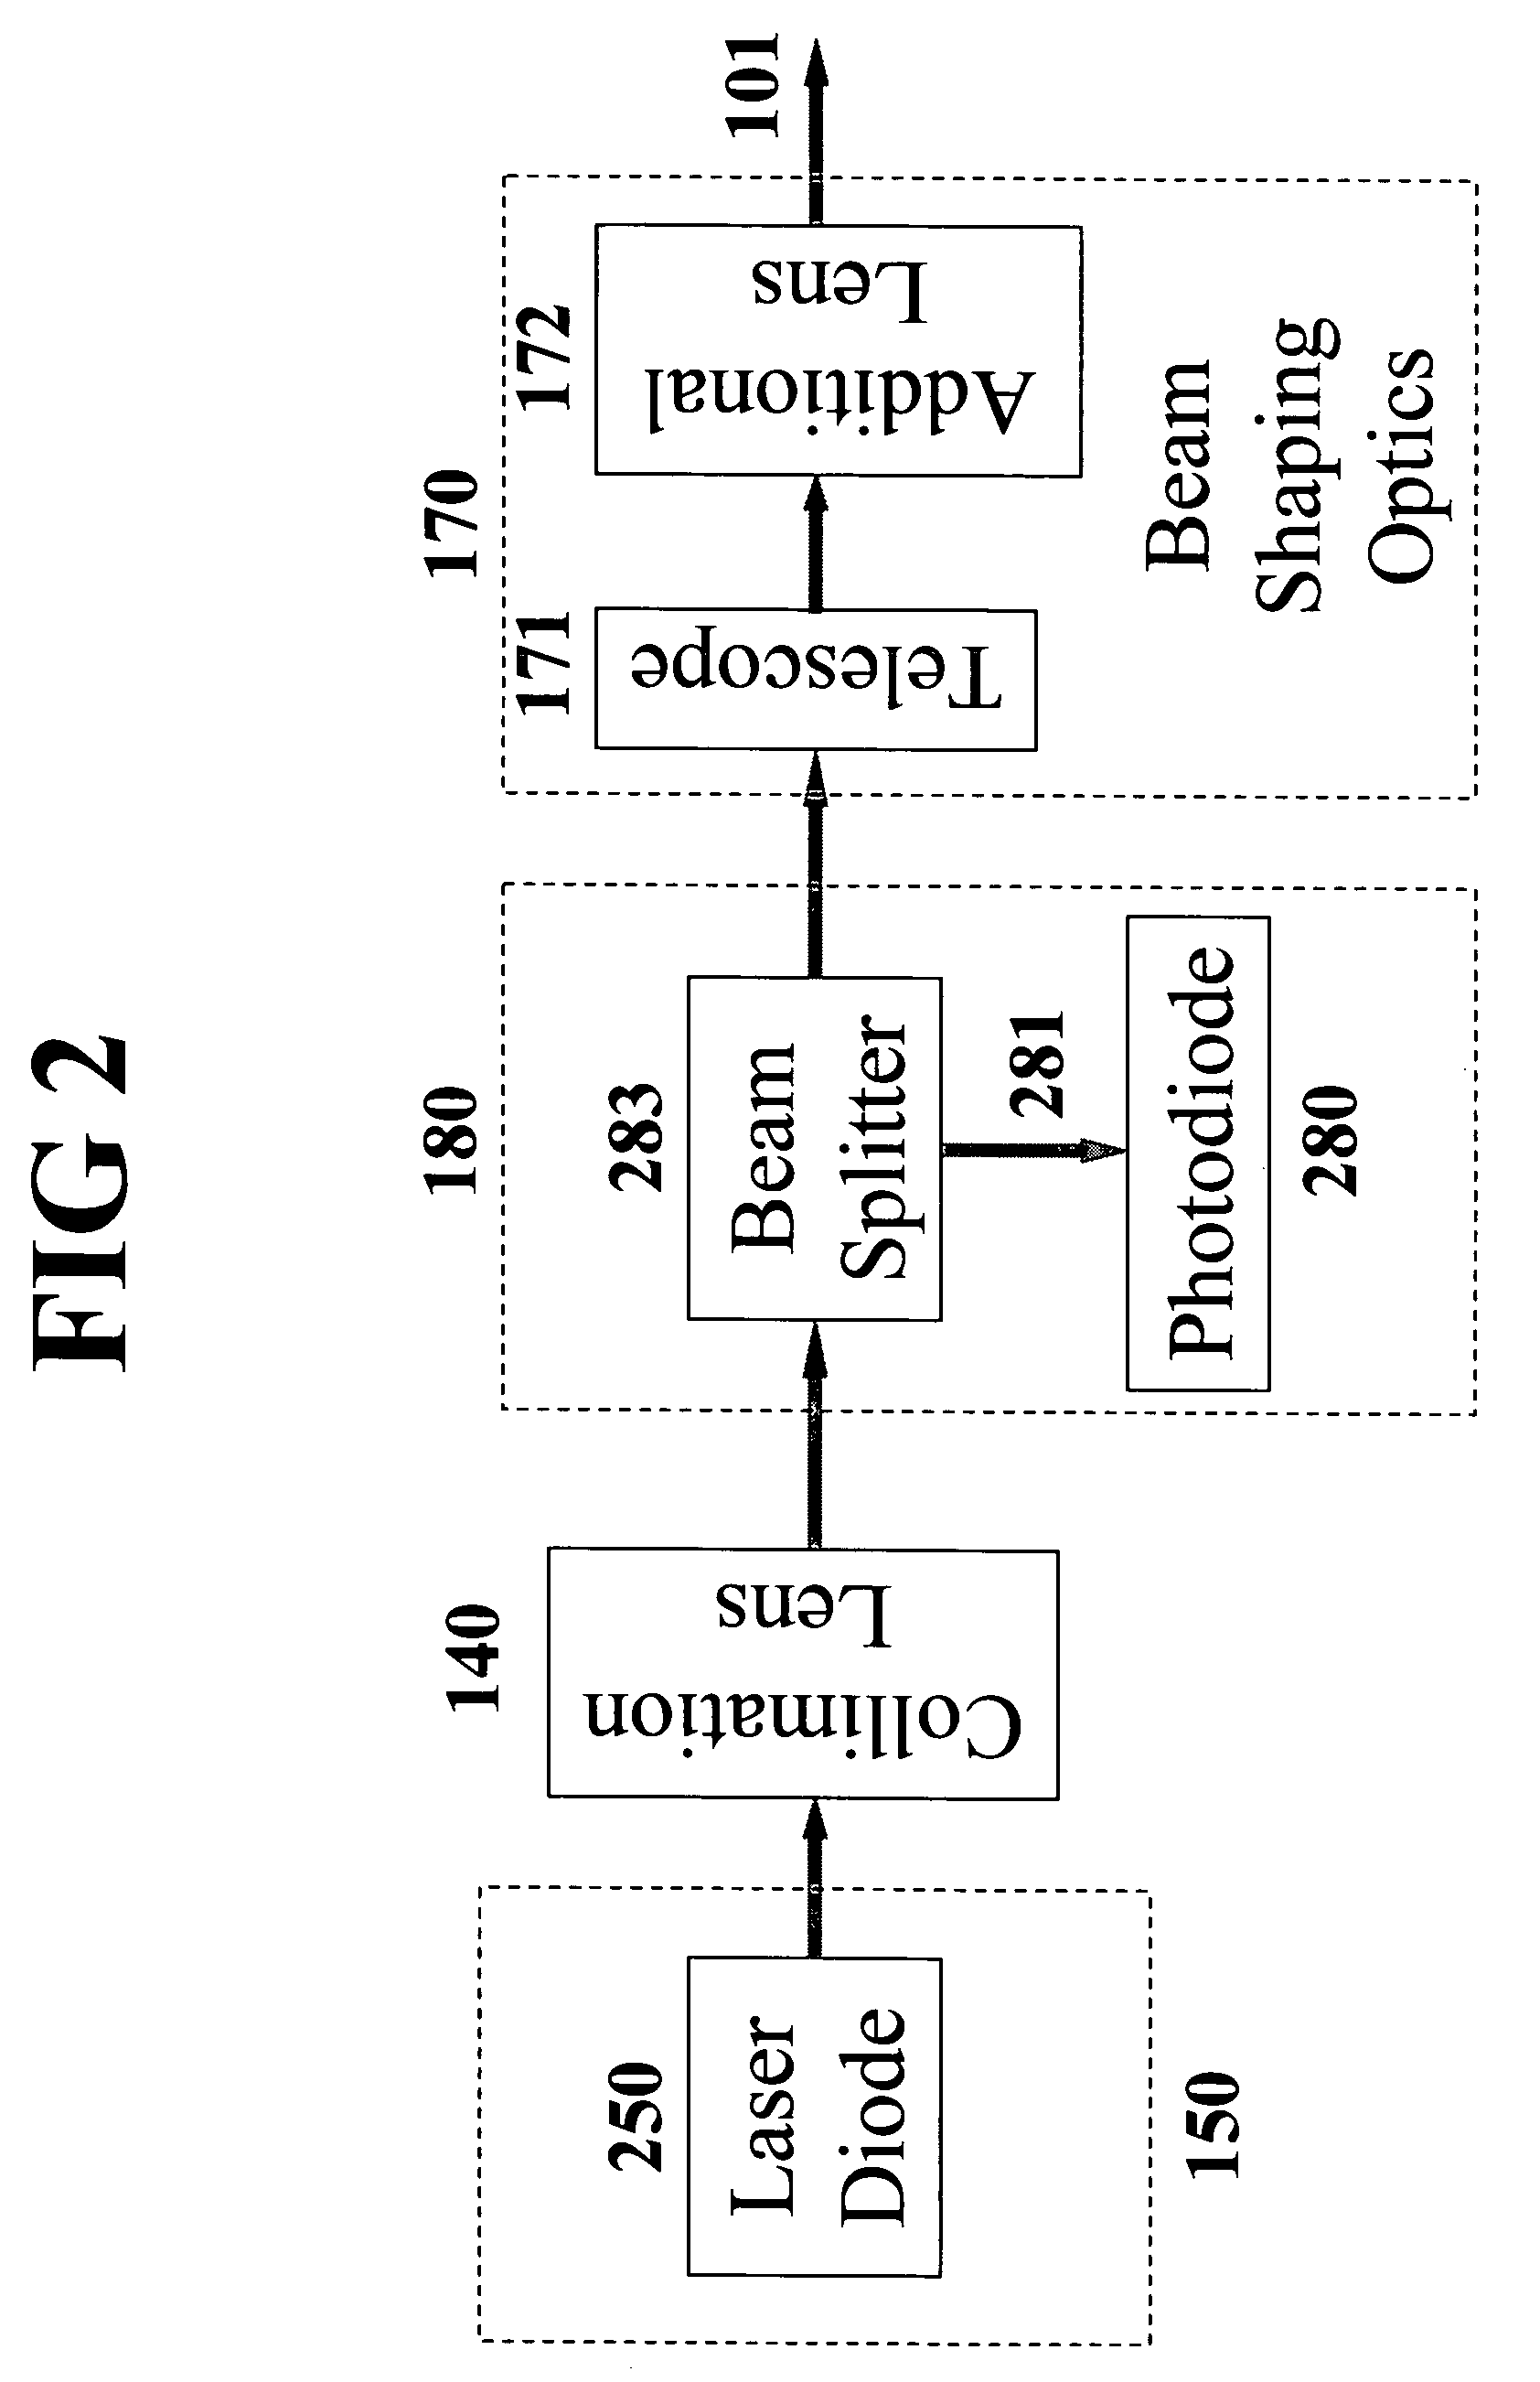 Radio frequency modulation of variable degree and automatic power control using external photodiode sensor for low-noise lasers of various wavelengths